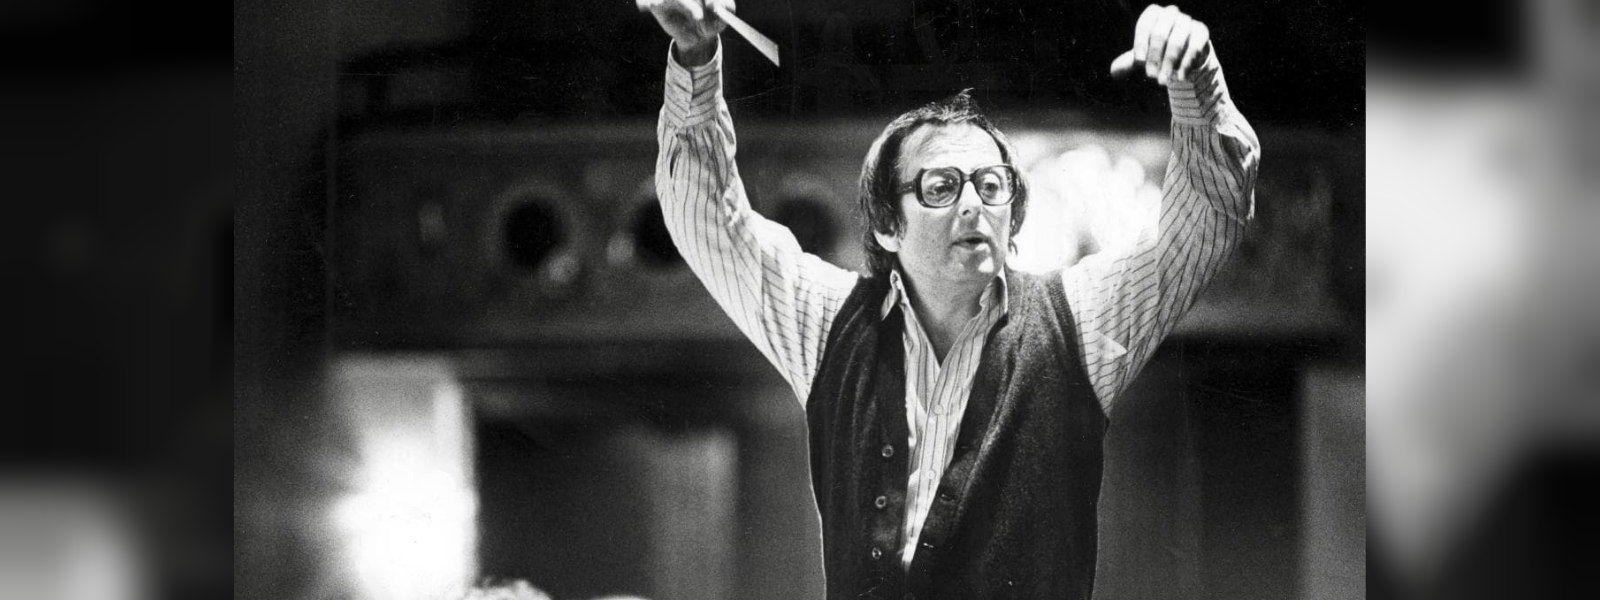 Acclaimed conductor and pianist Andre Previn dies